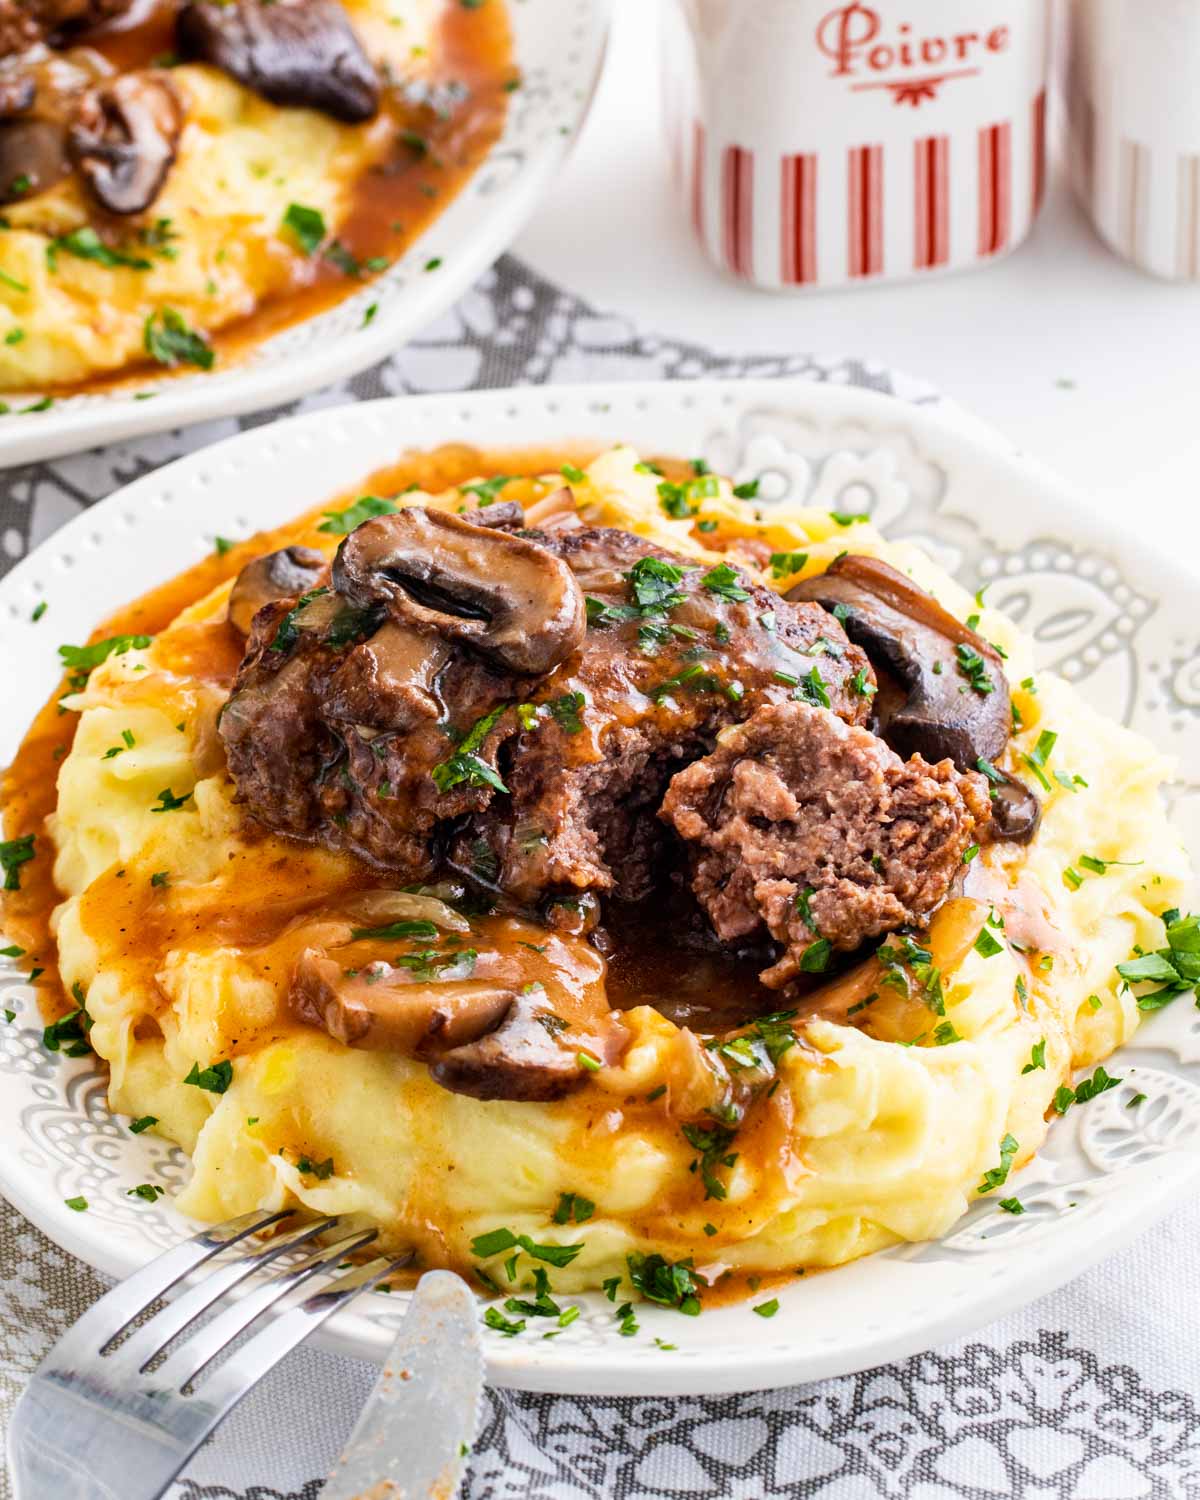 a salisbury steak over a bed of mashed potatoes garnished with parsley.